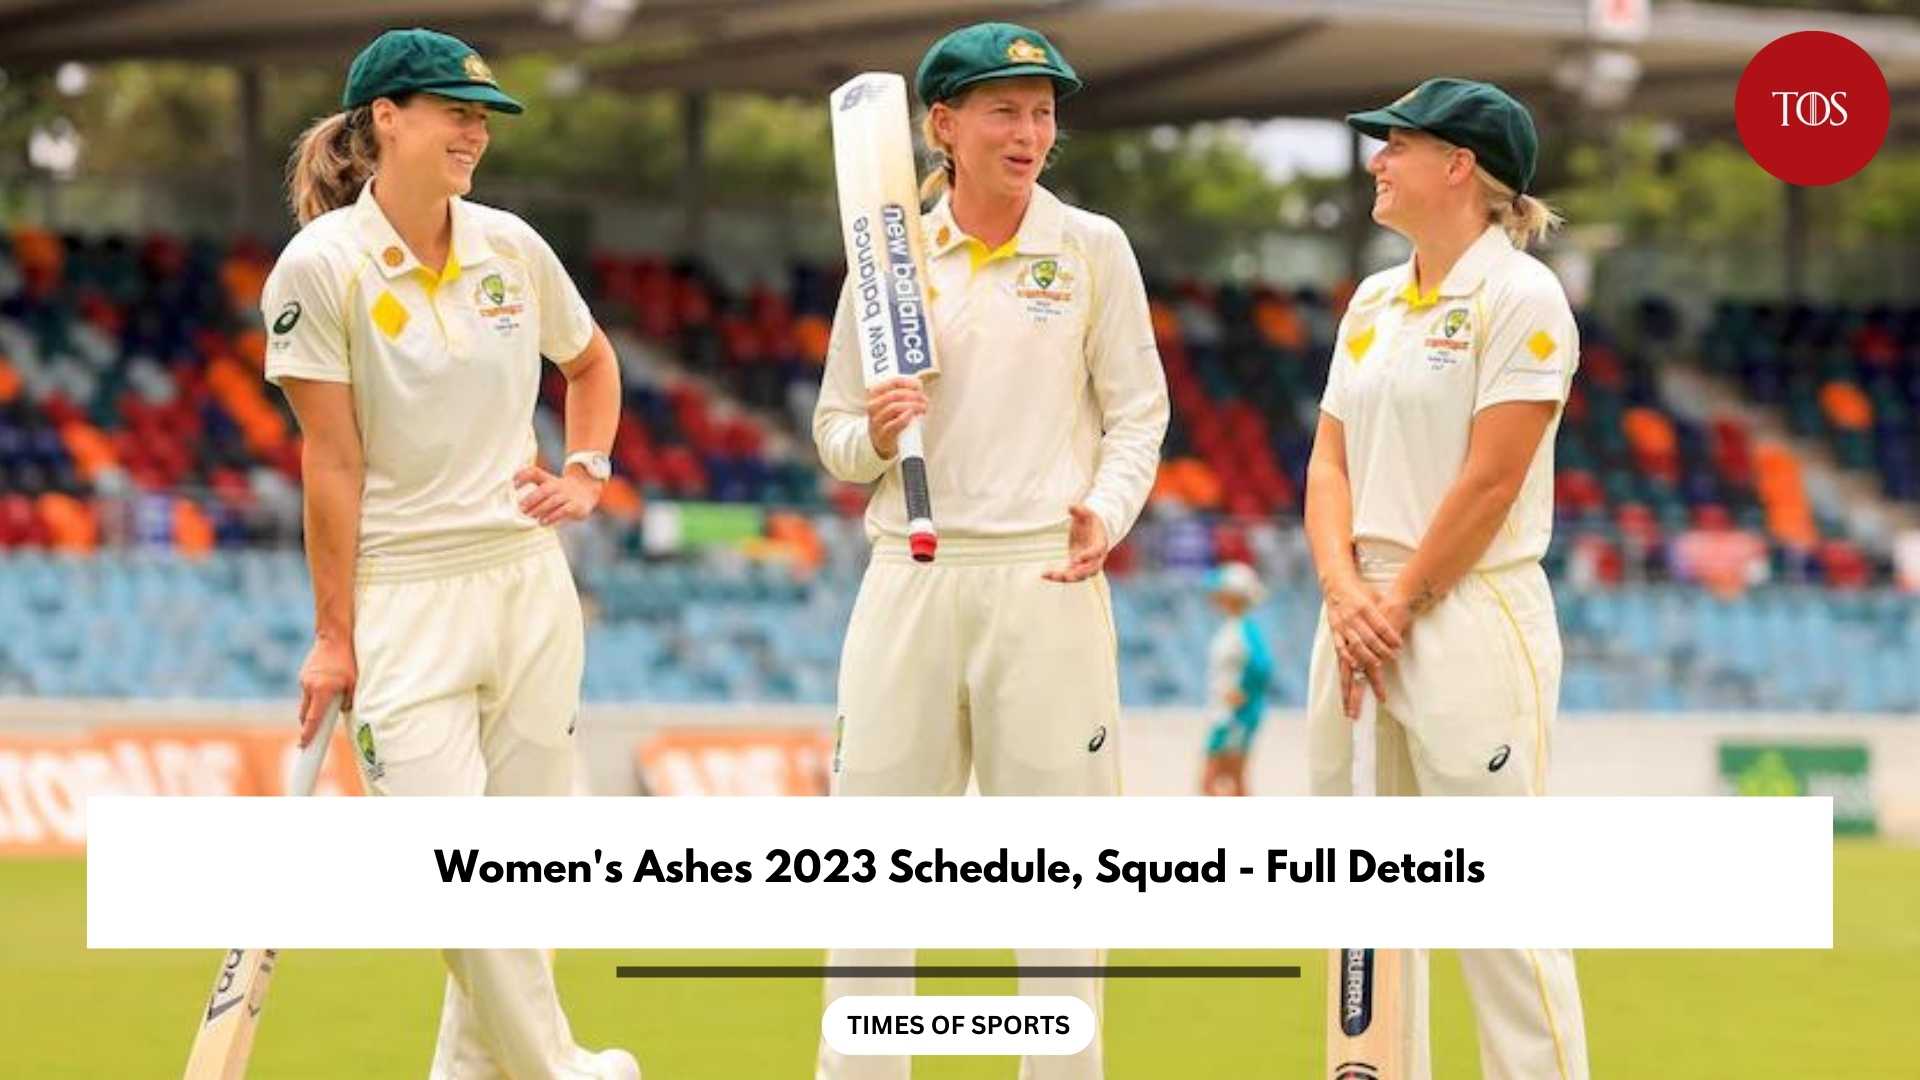 Women's Ashes 2023 Schedule, Squad Full Details